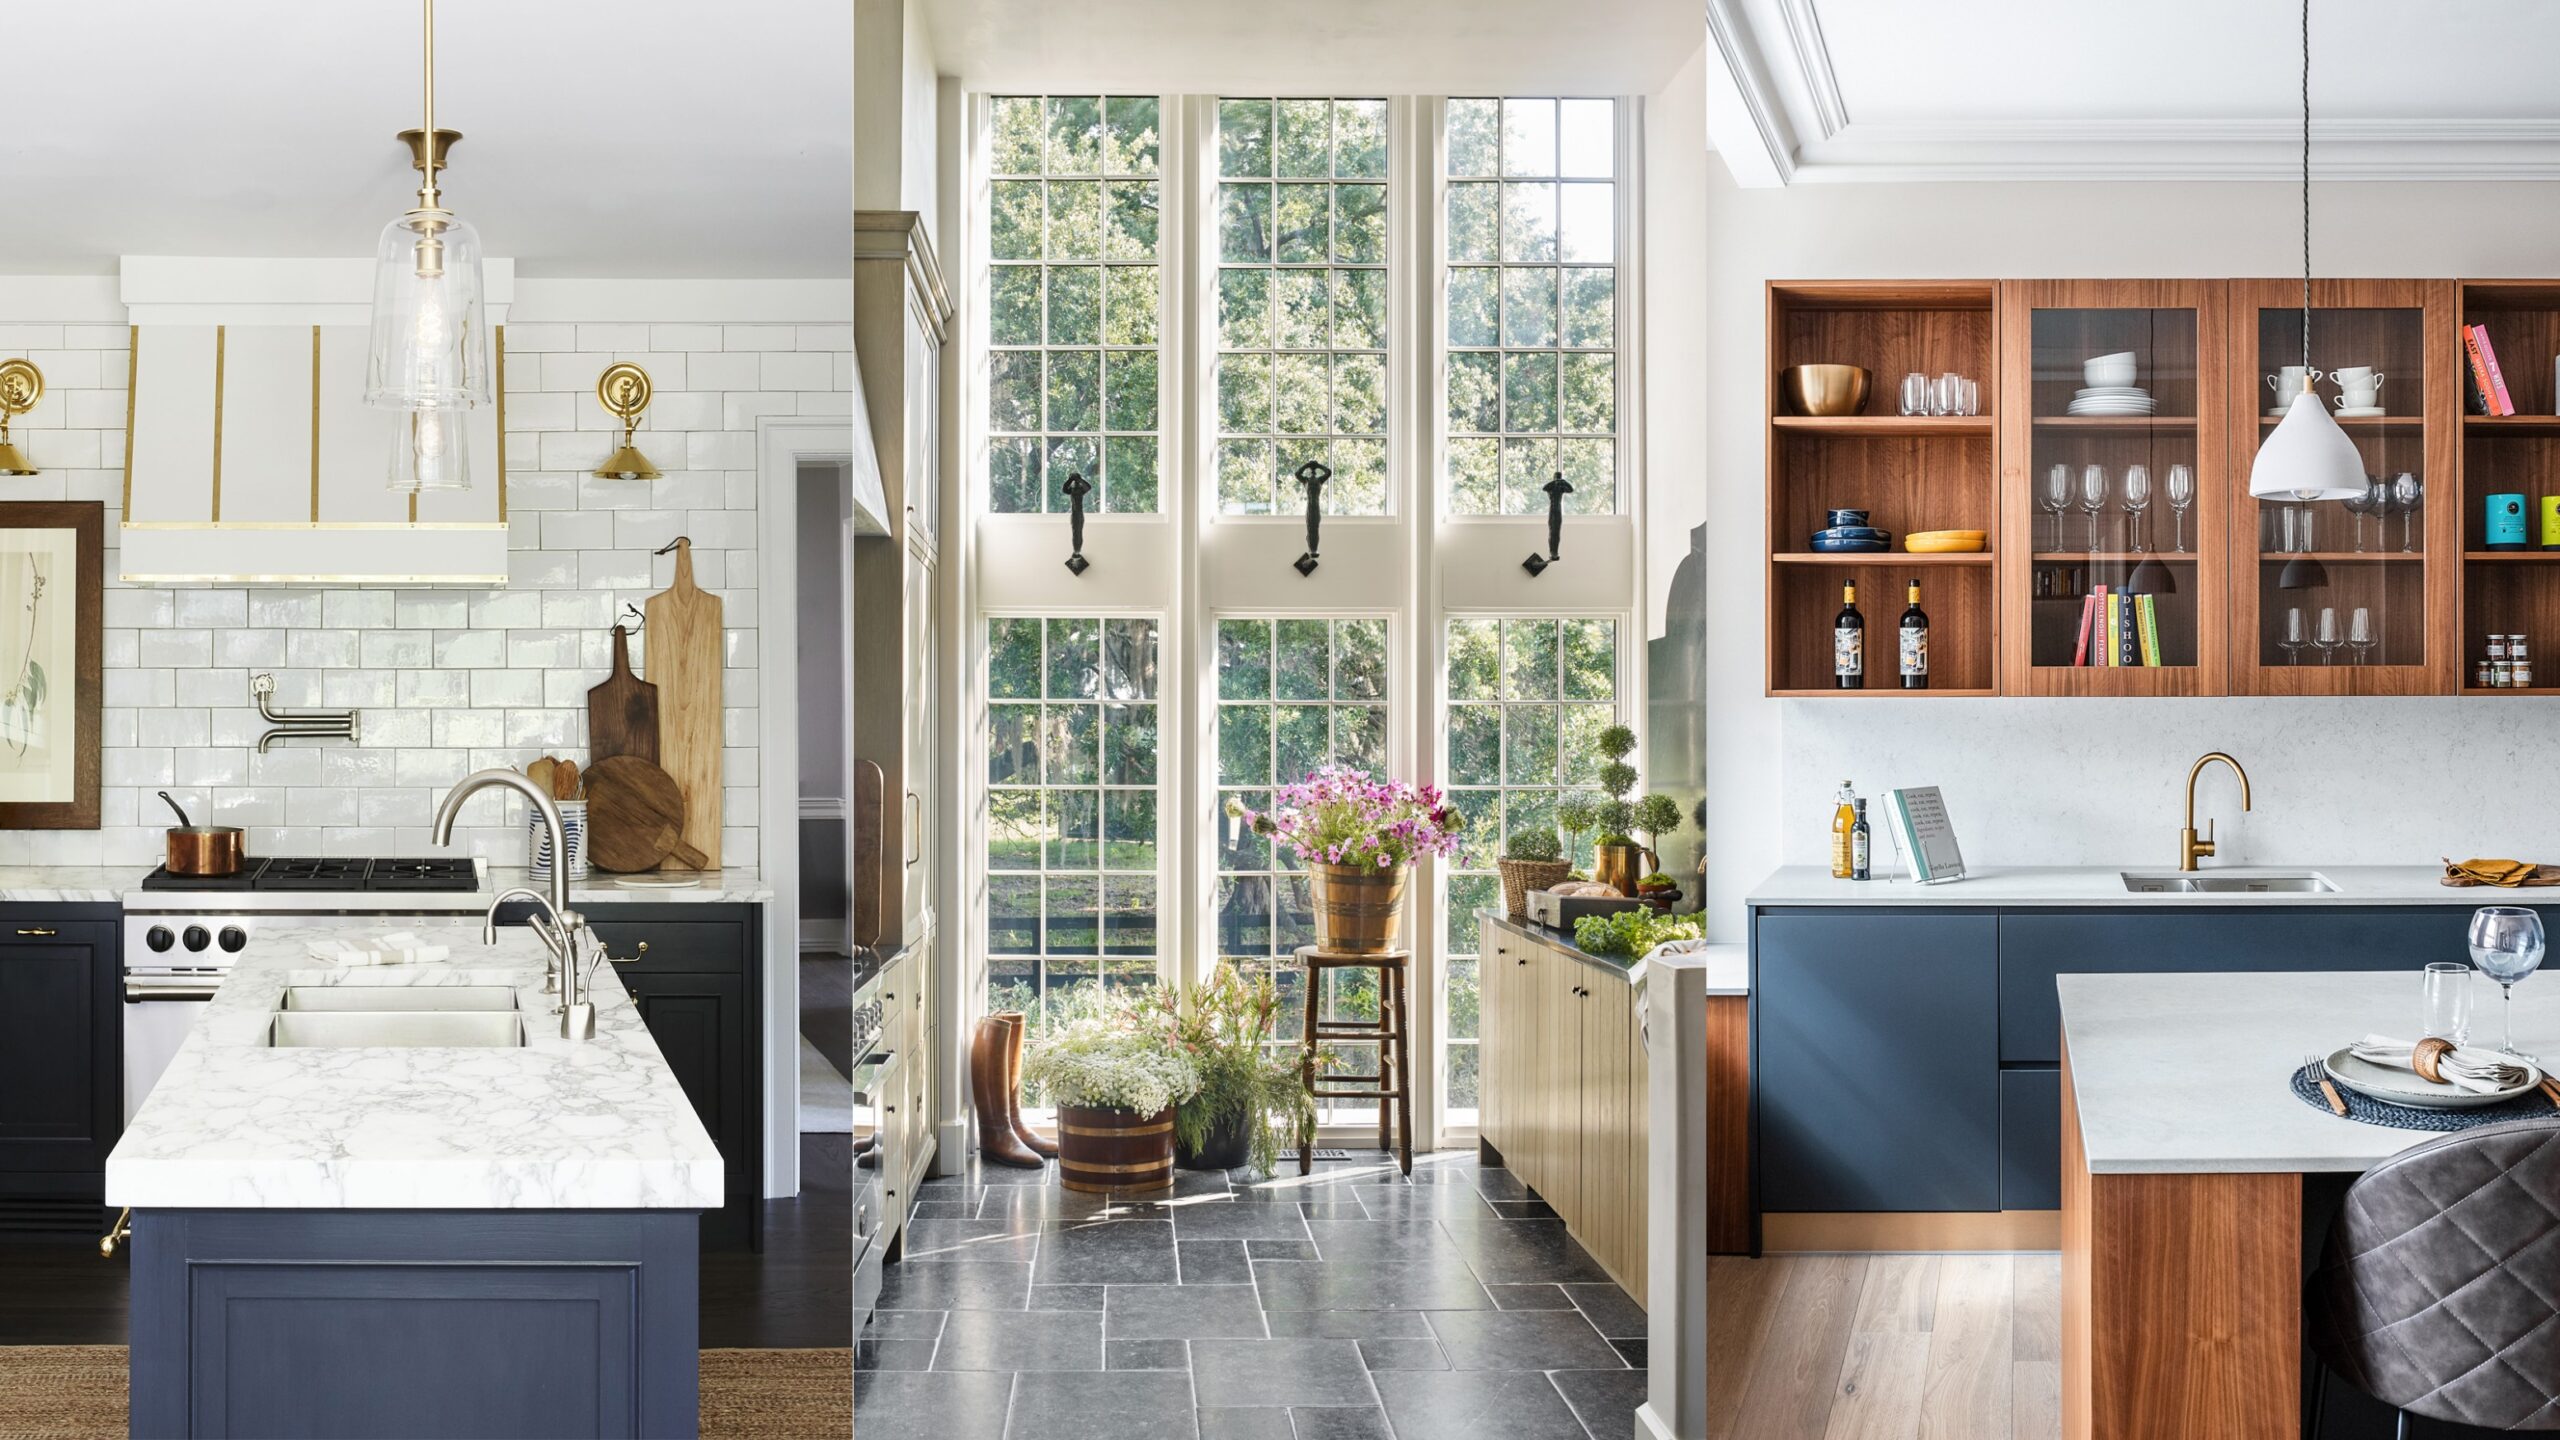 Small kitchen layouts: 8 ideas to maximize that small space